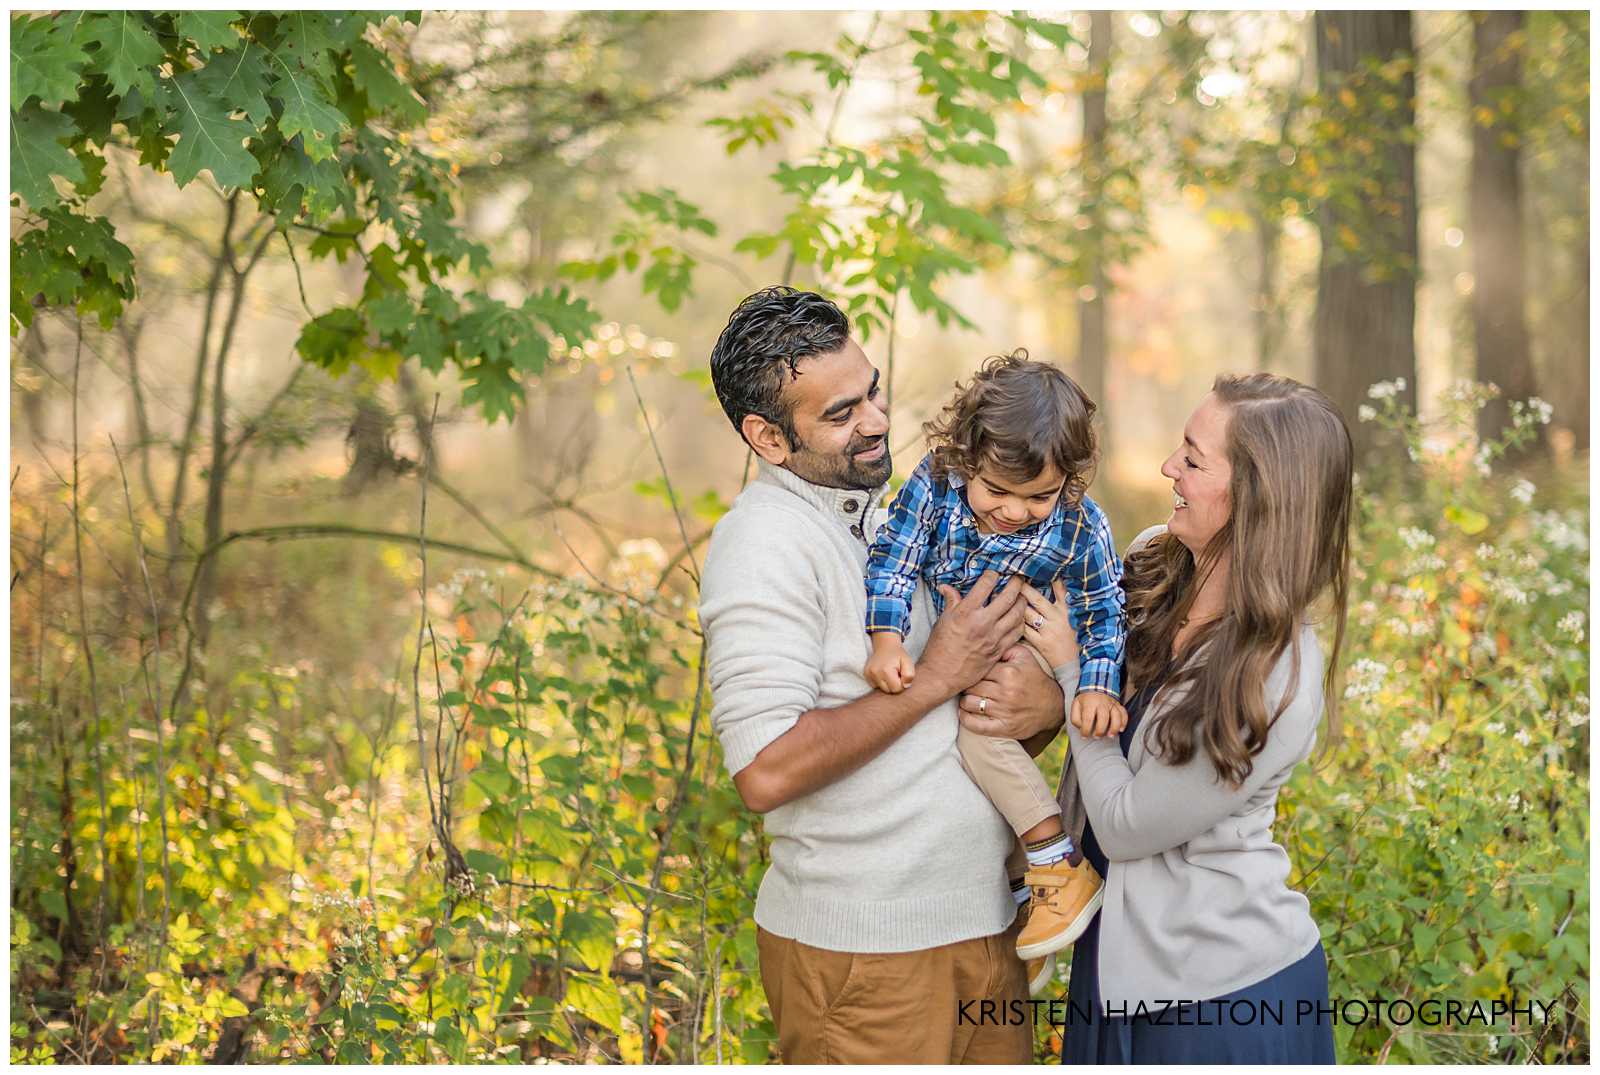 Mom and Dad tickling their toddler son by River Forest, IL family photographer Kristen Hazelton